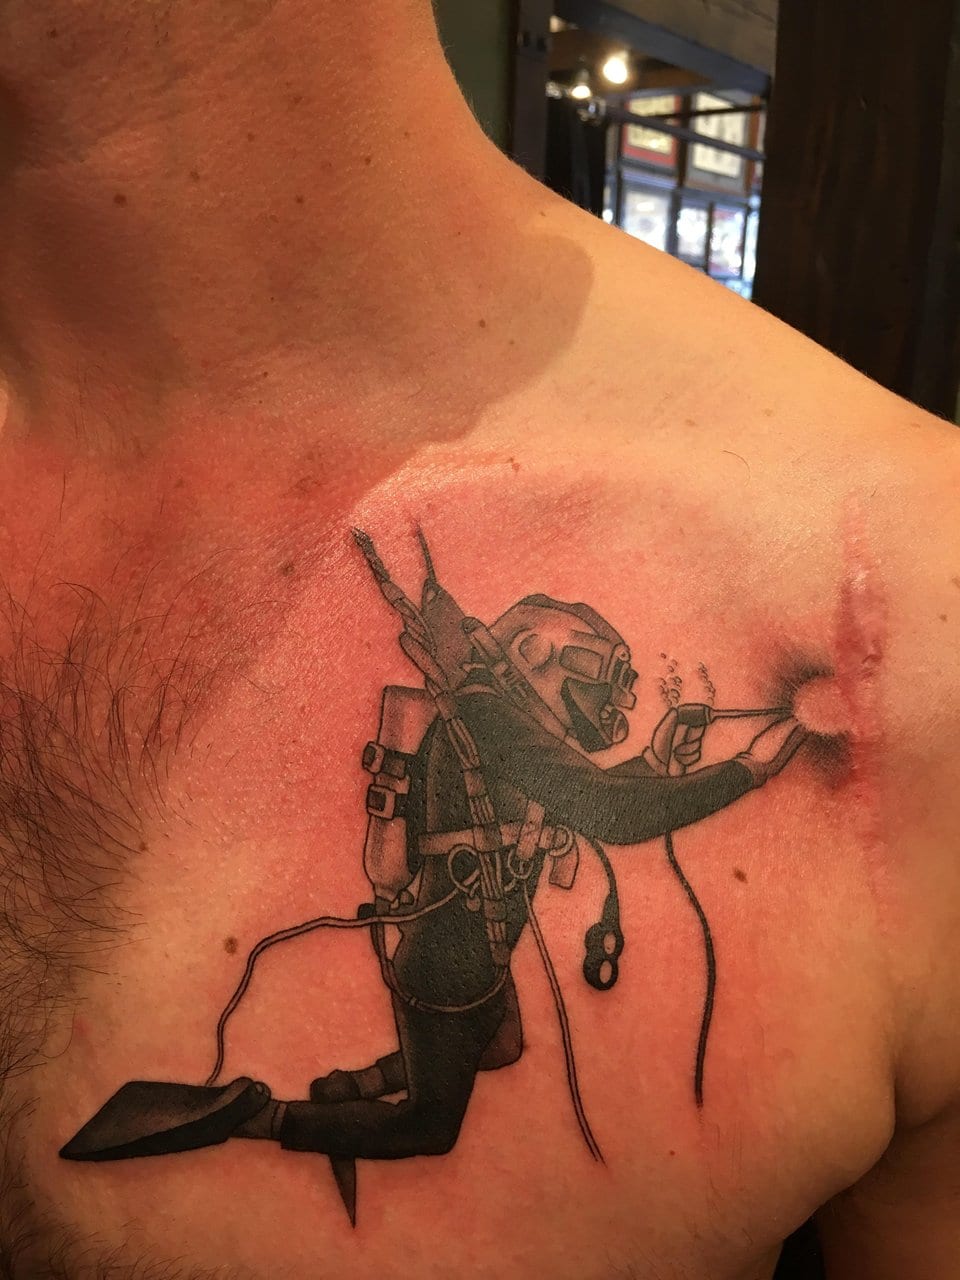 Here is a tattoo of an underwater welder closing up a tear in this person’s shoulder. It looks like he has had some kind of shoulder surgery, but is currently under repair.